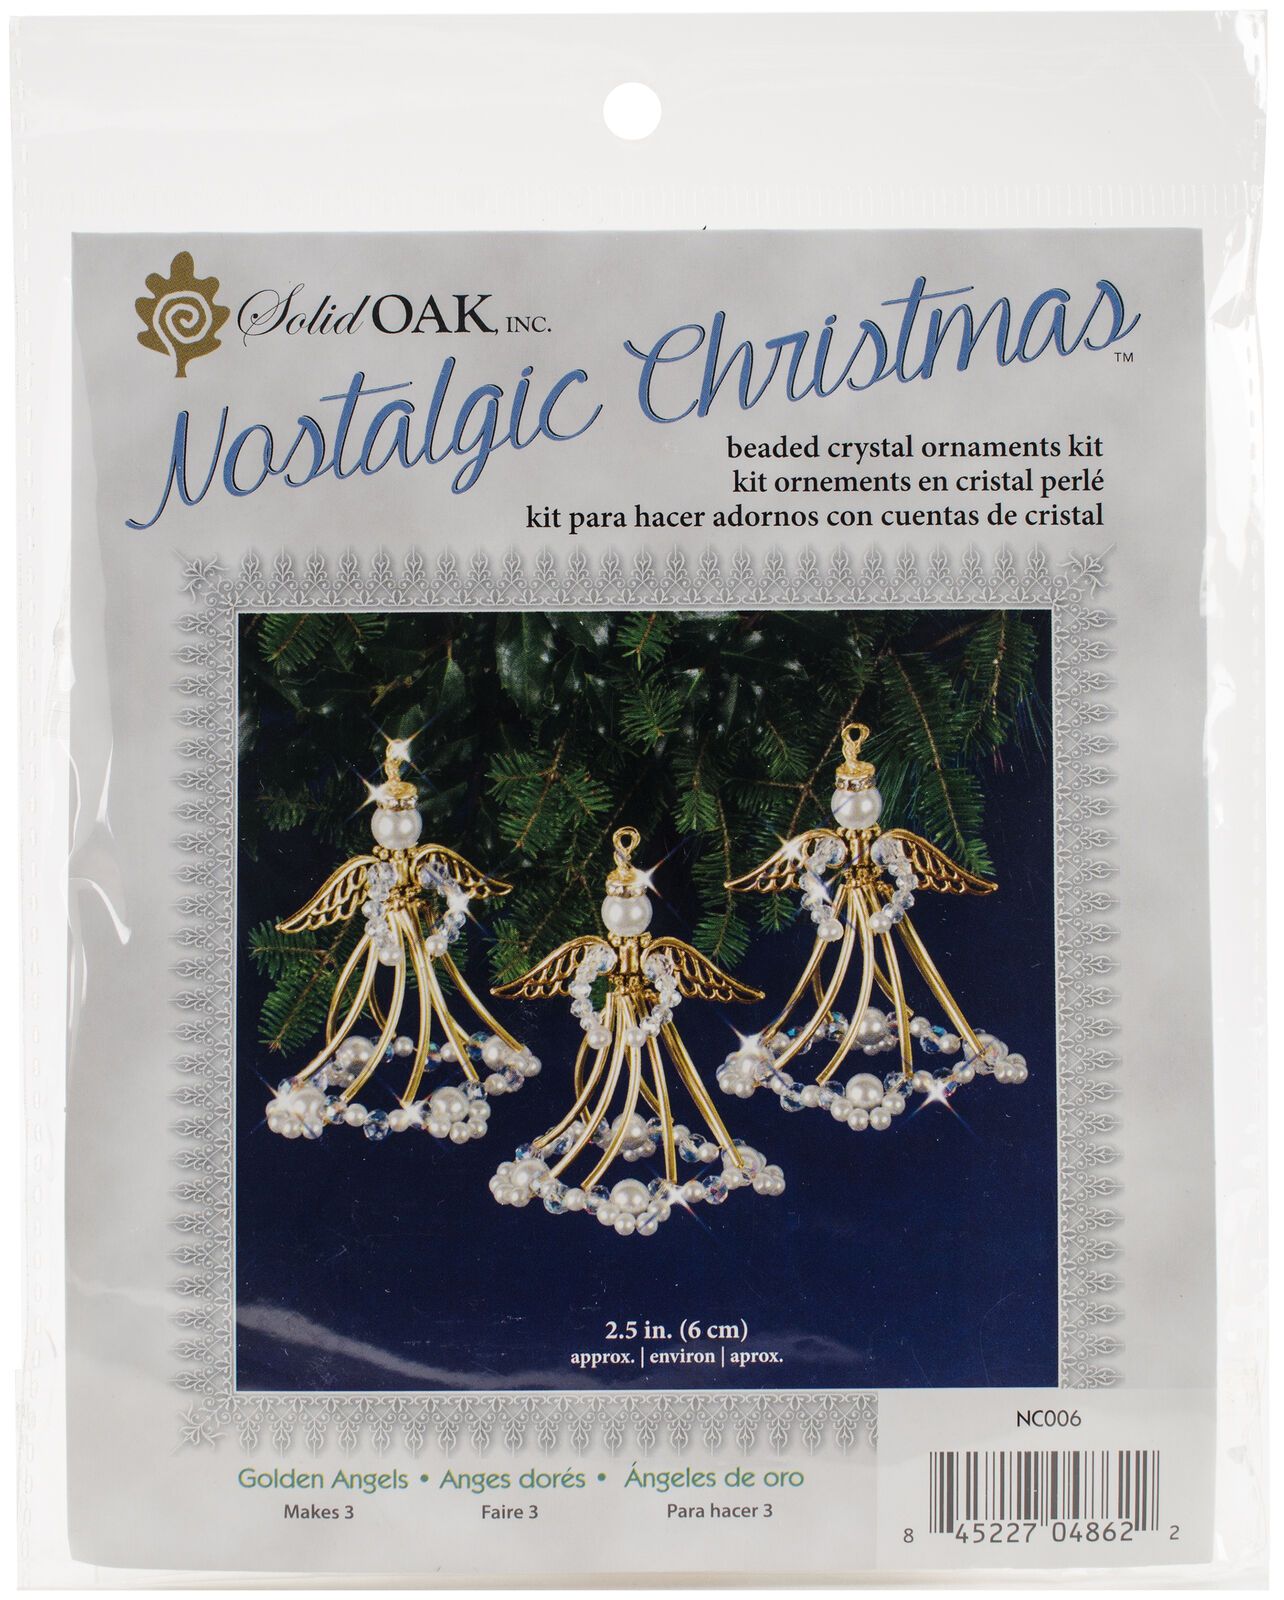 Solid Oak Holiday Beaded Ornament Kit-Golden Angels Makes 3